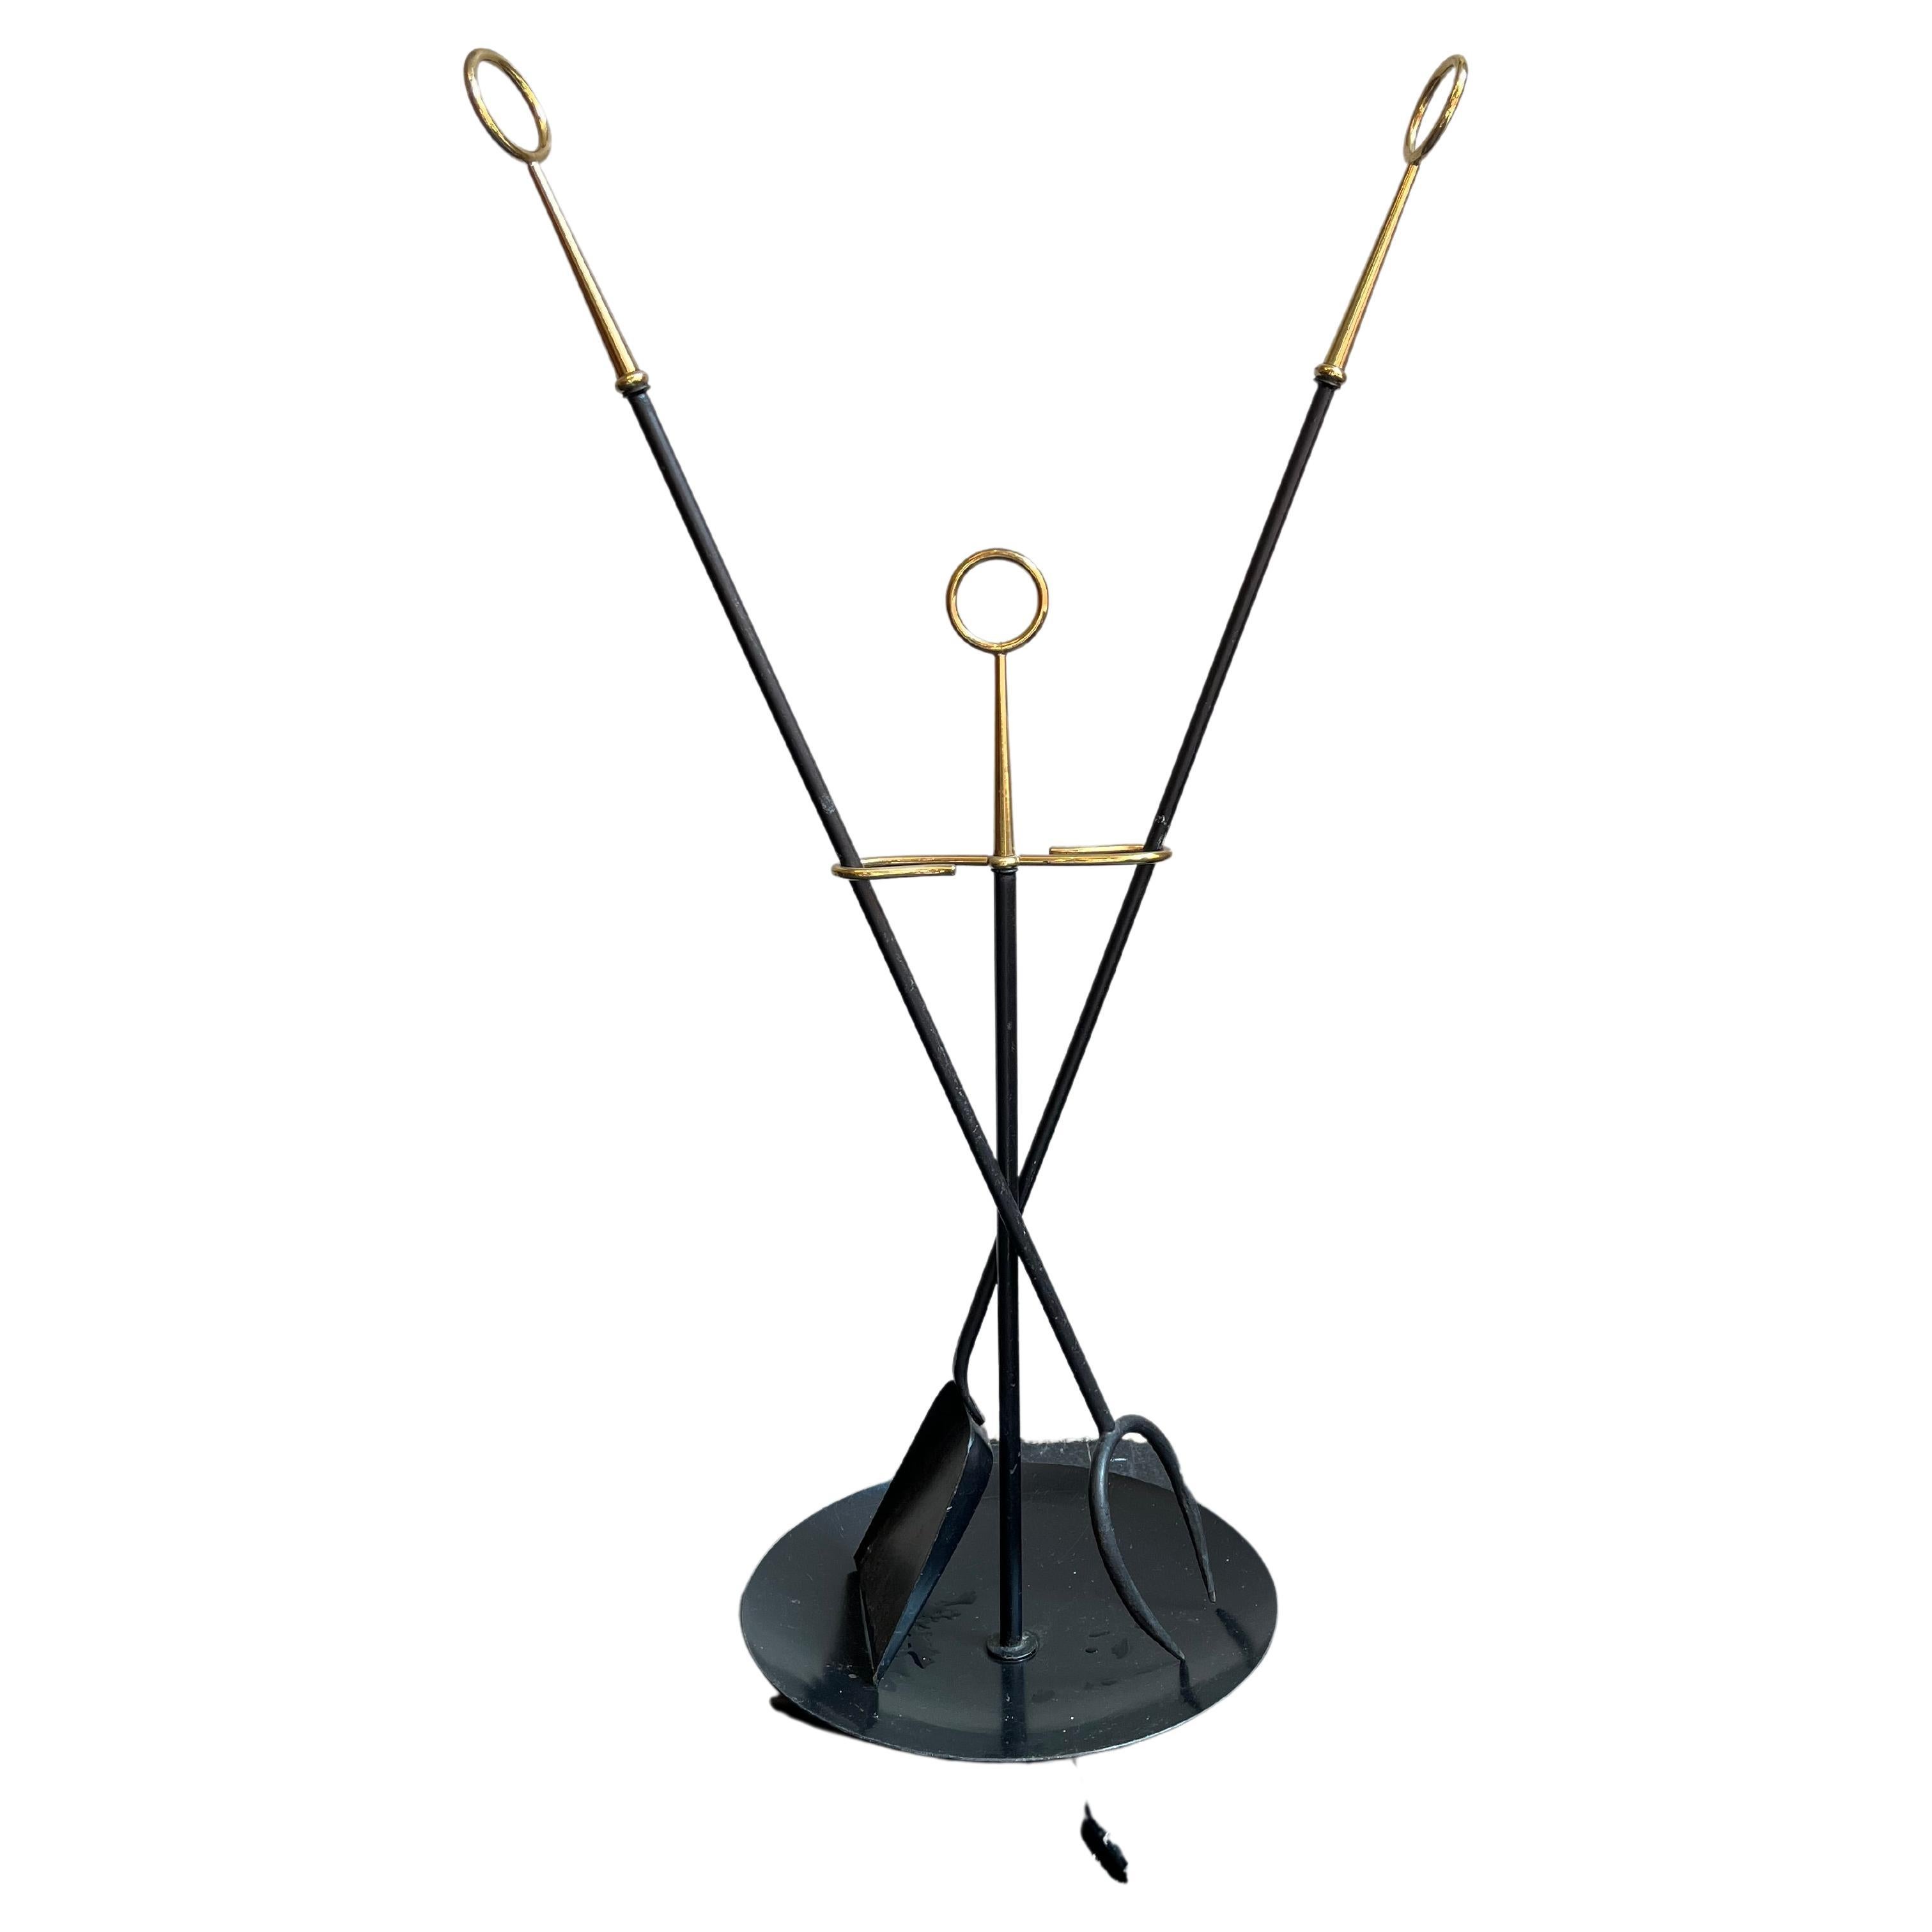 Gunnar Ander Ystad-Metall Fireplace Tools, 1950s For Sale